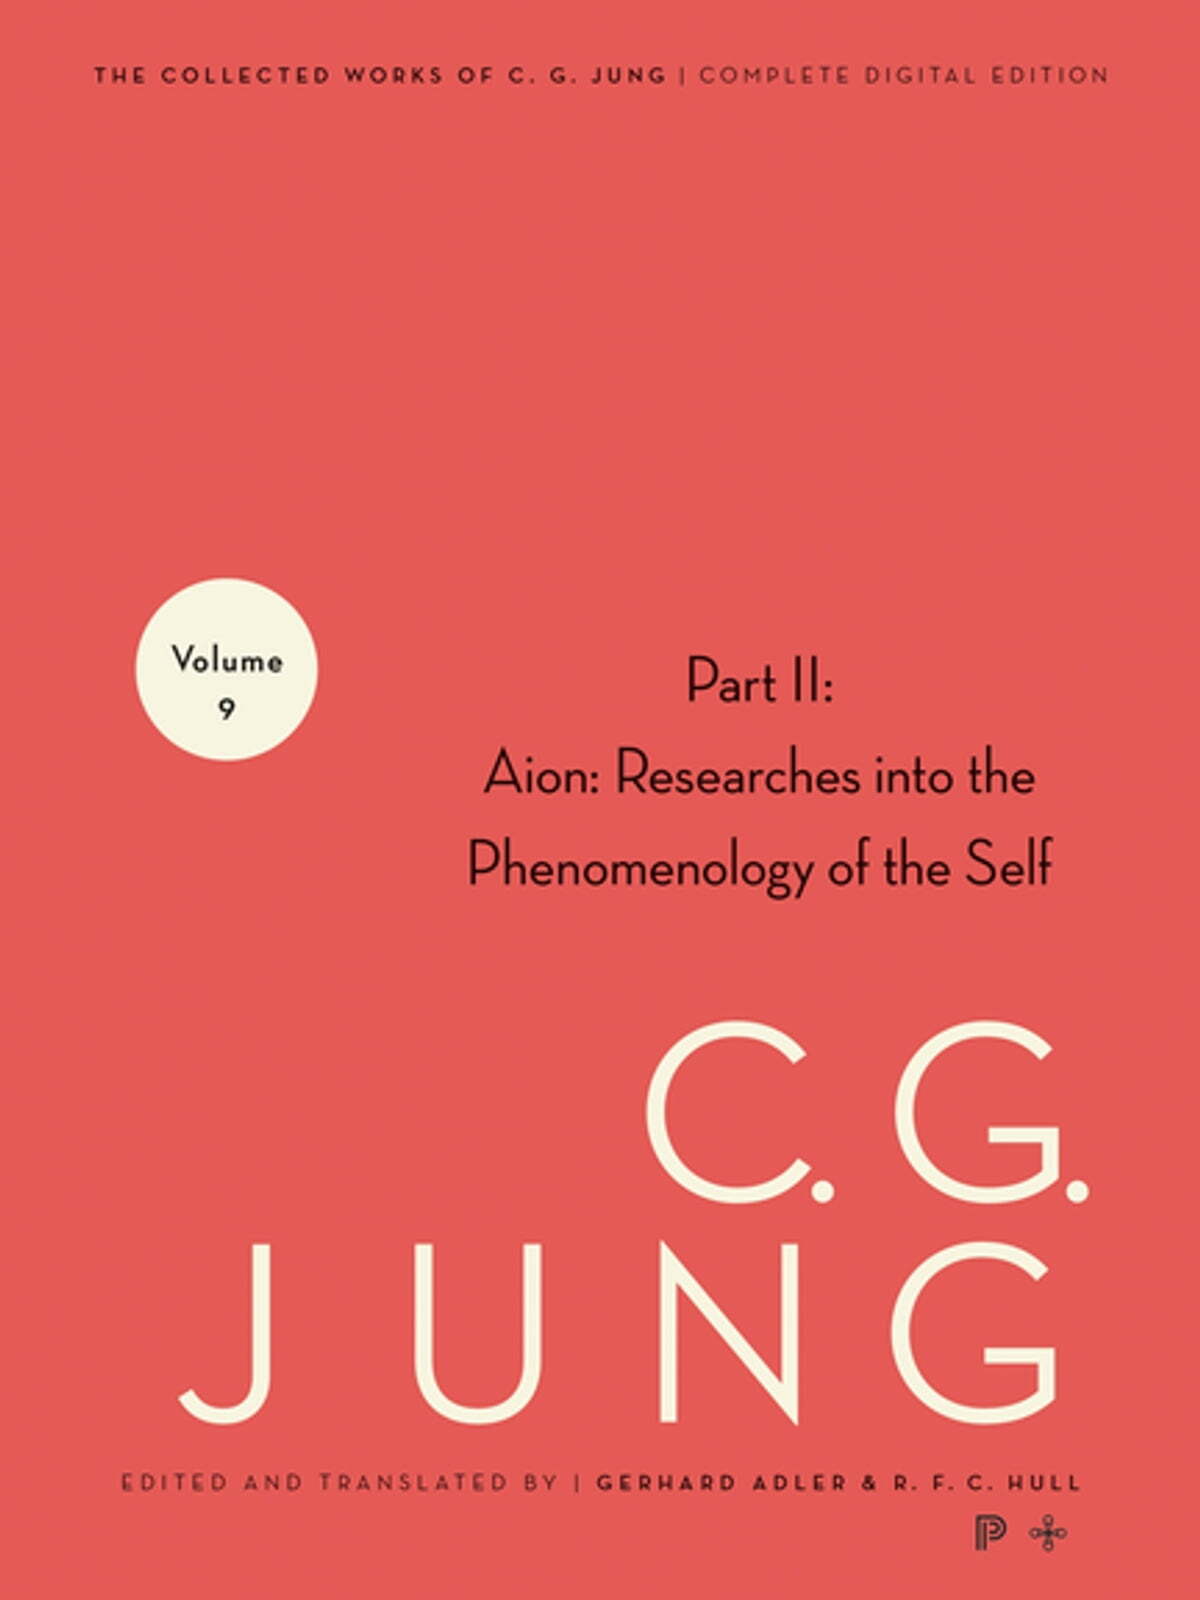 Collected Works of C. G. Jung - Volume 9 (Part 2): Aion: Researches into the Phenomenology of the Self